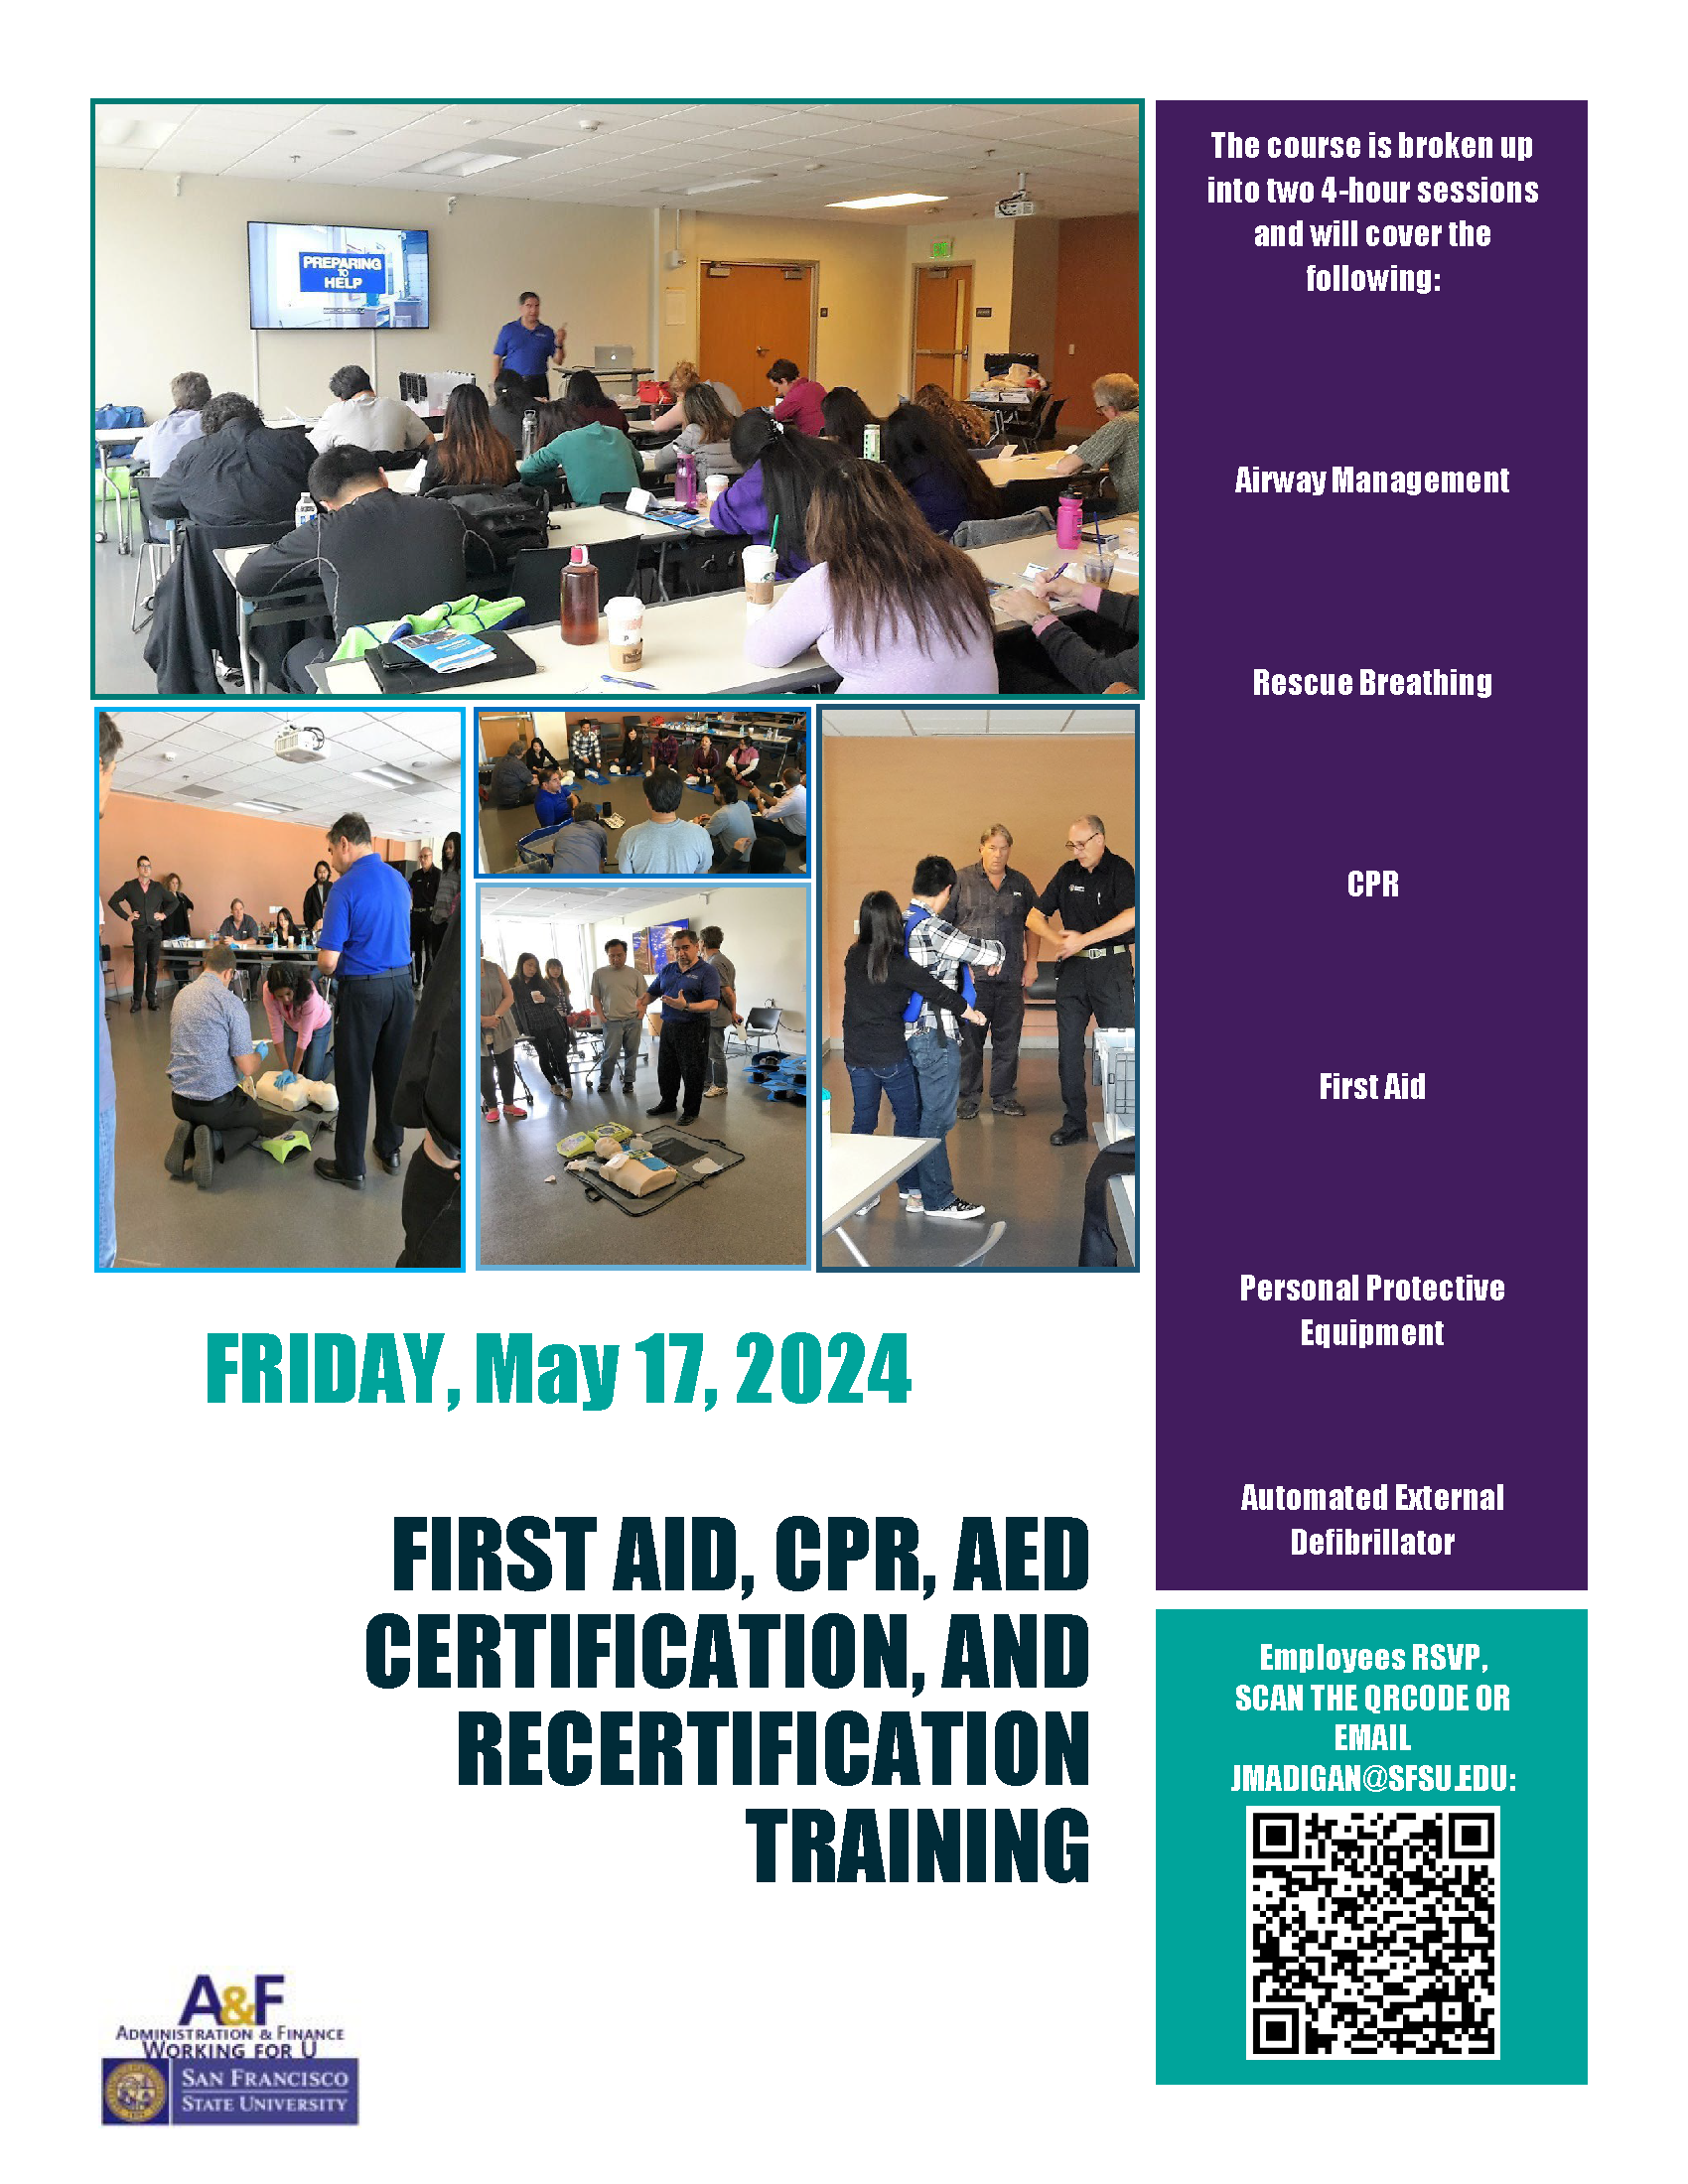 Flyer for first aid CPR and AED training in May 2024